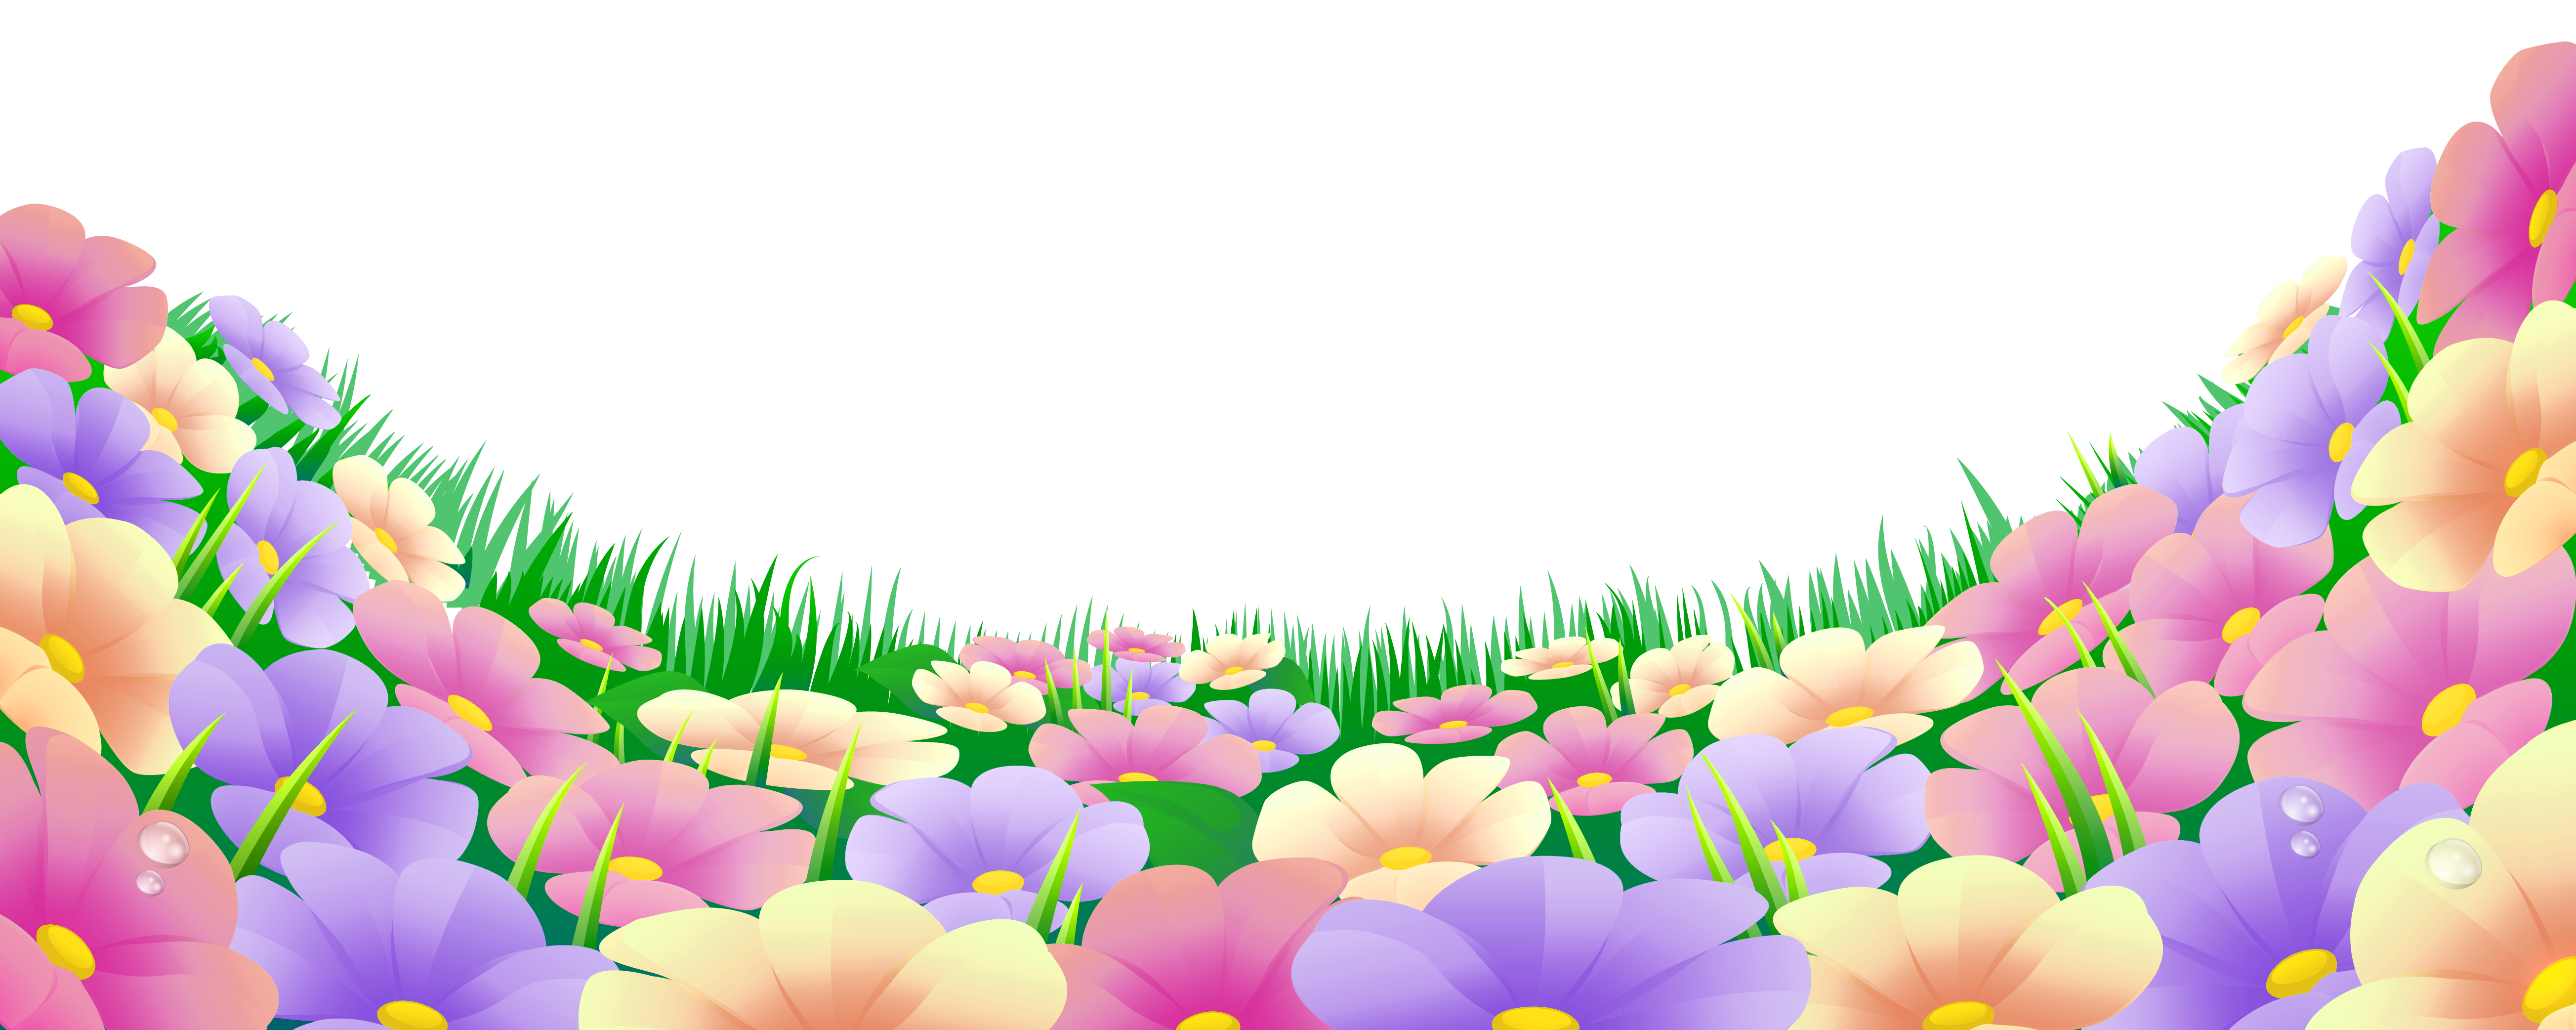 Grass with Beautiful Flowers PNG Clipart  Gallery 